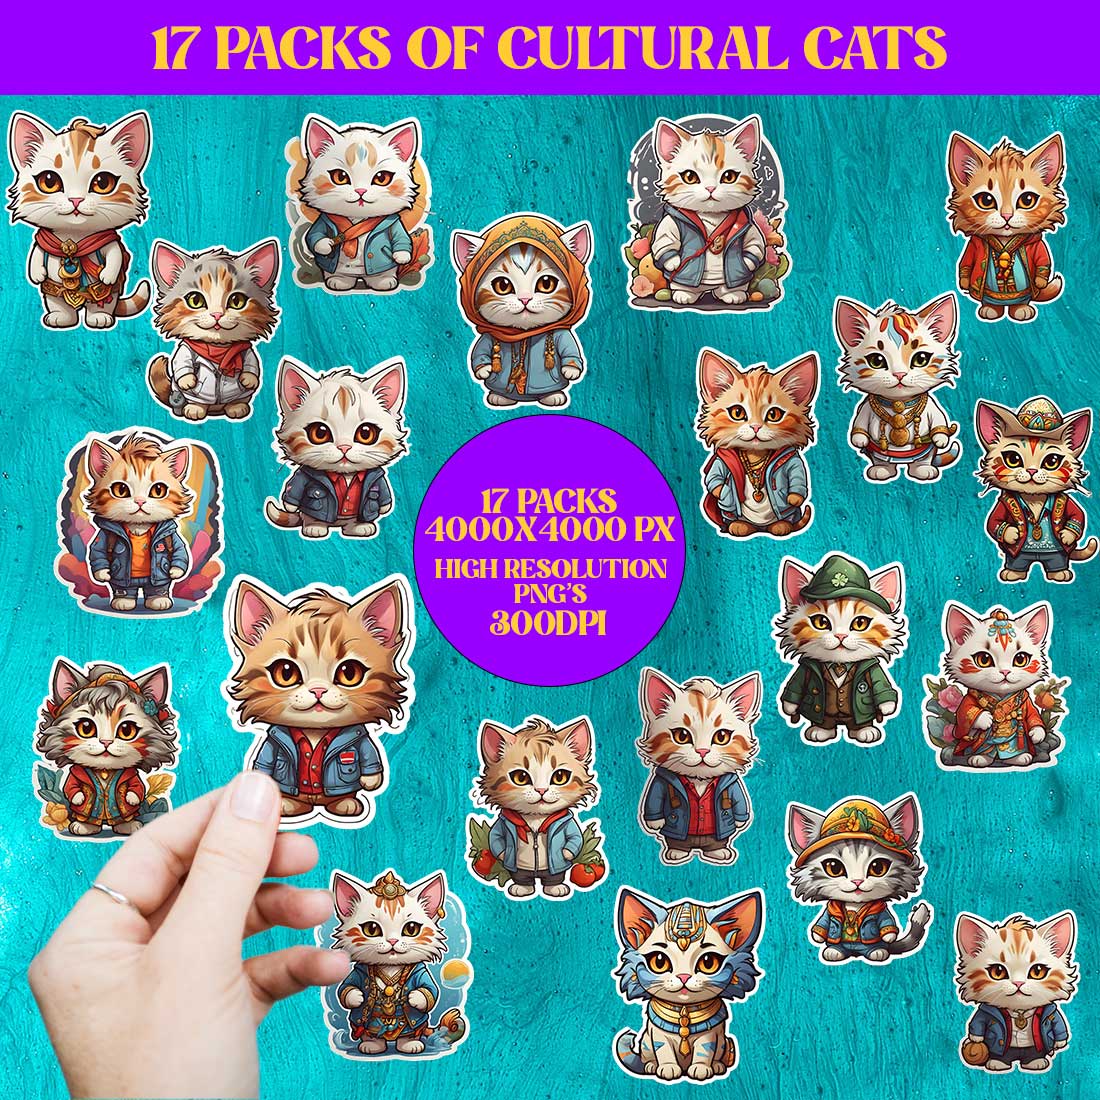 All Cats Cultural Packs PNGs Discounted Price cover image.